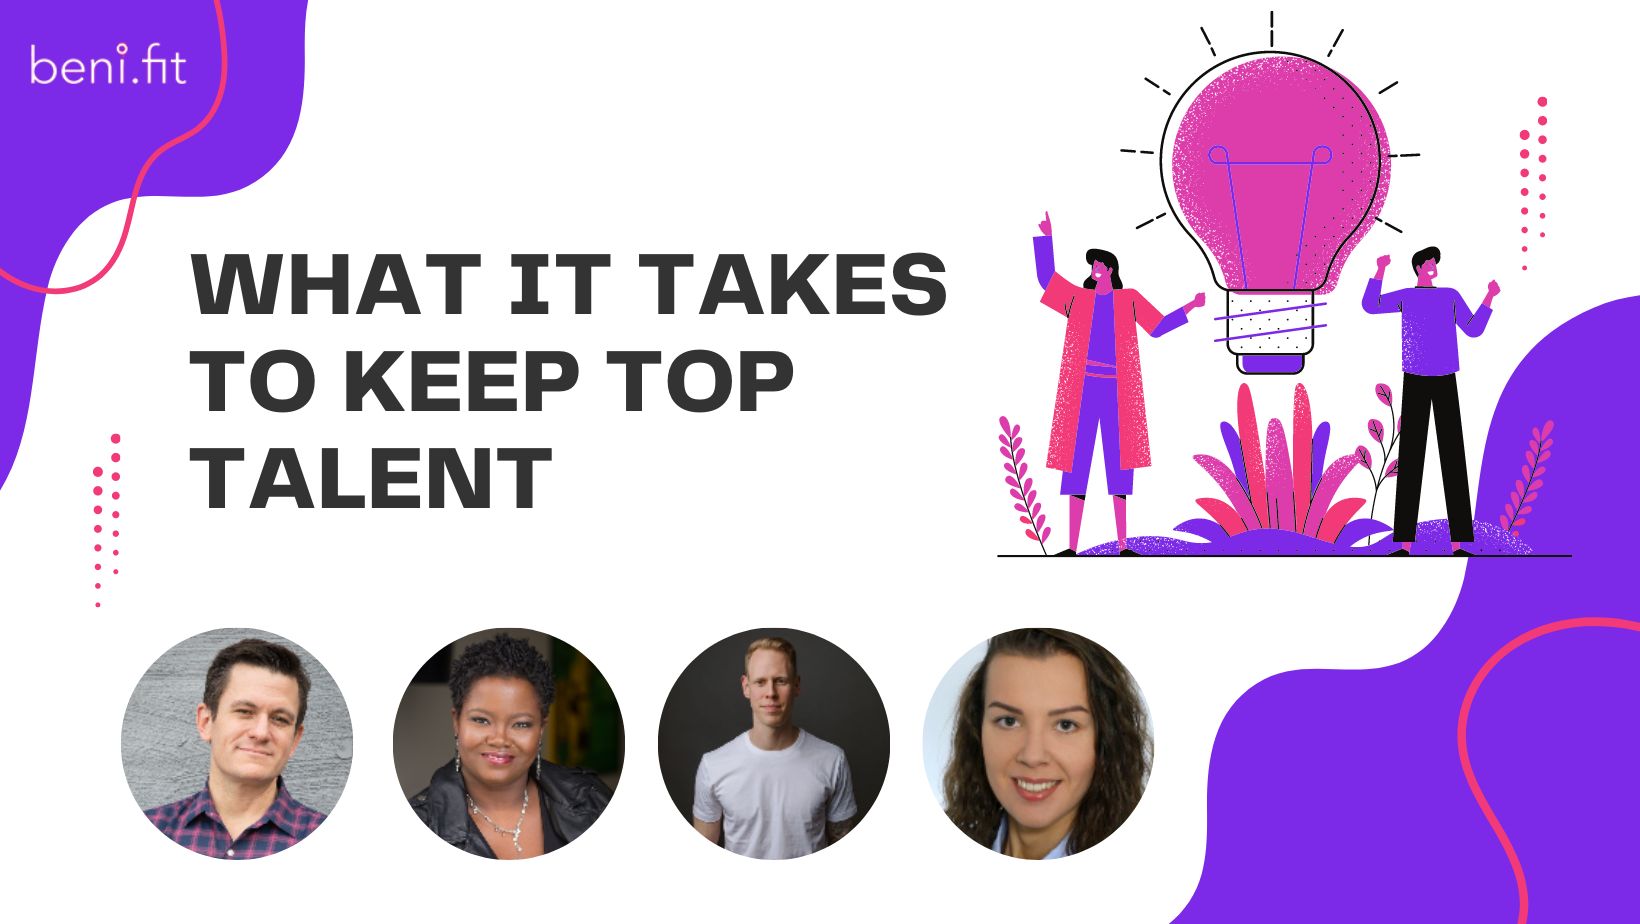 What it Takes to Keep Top Talent